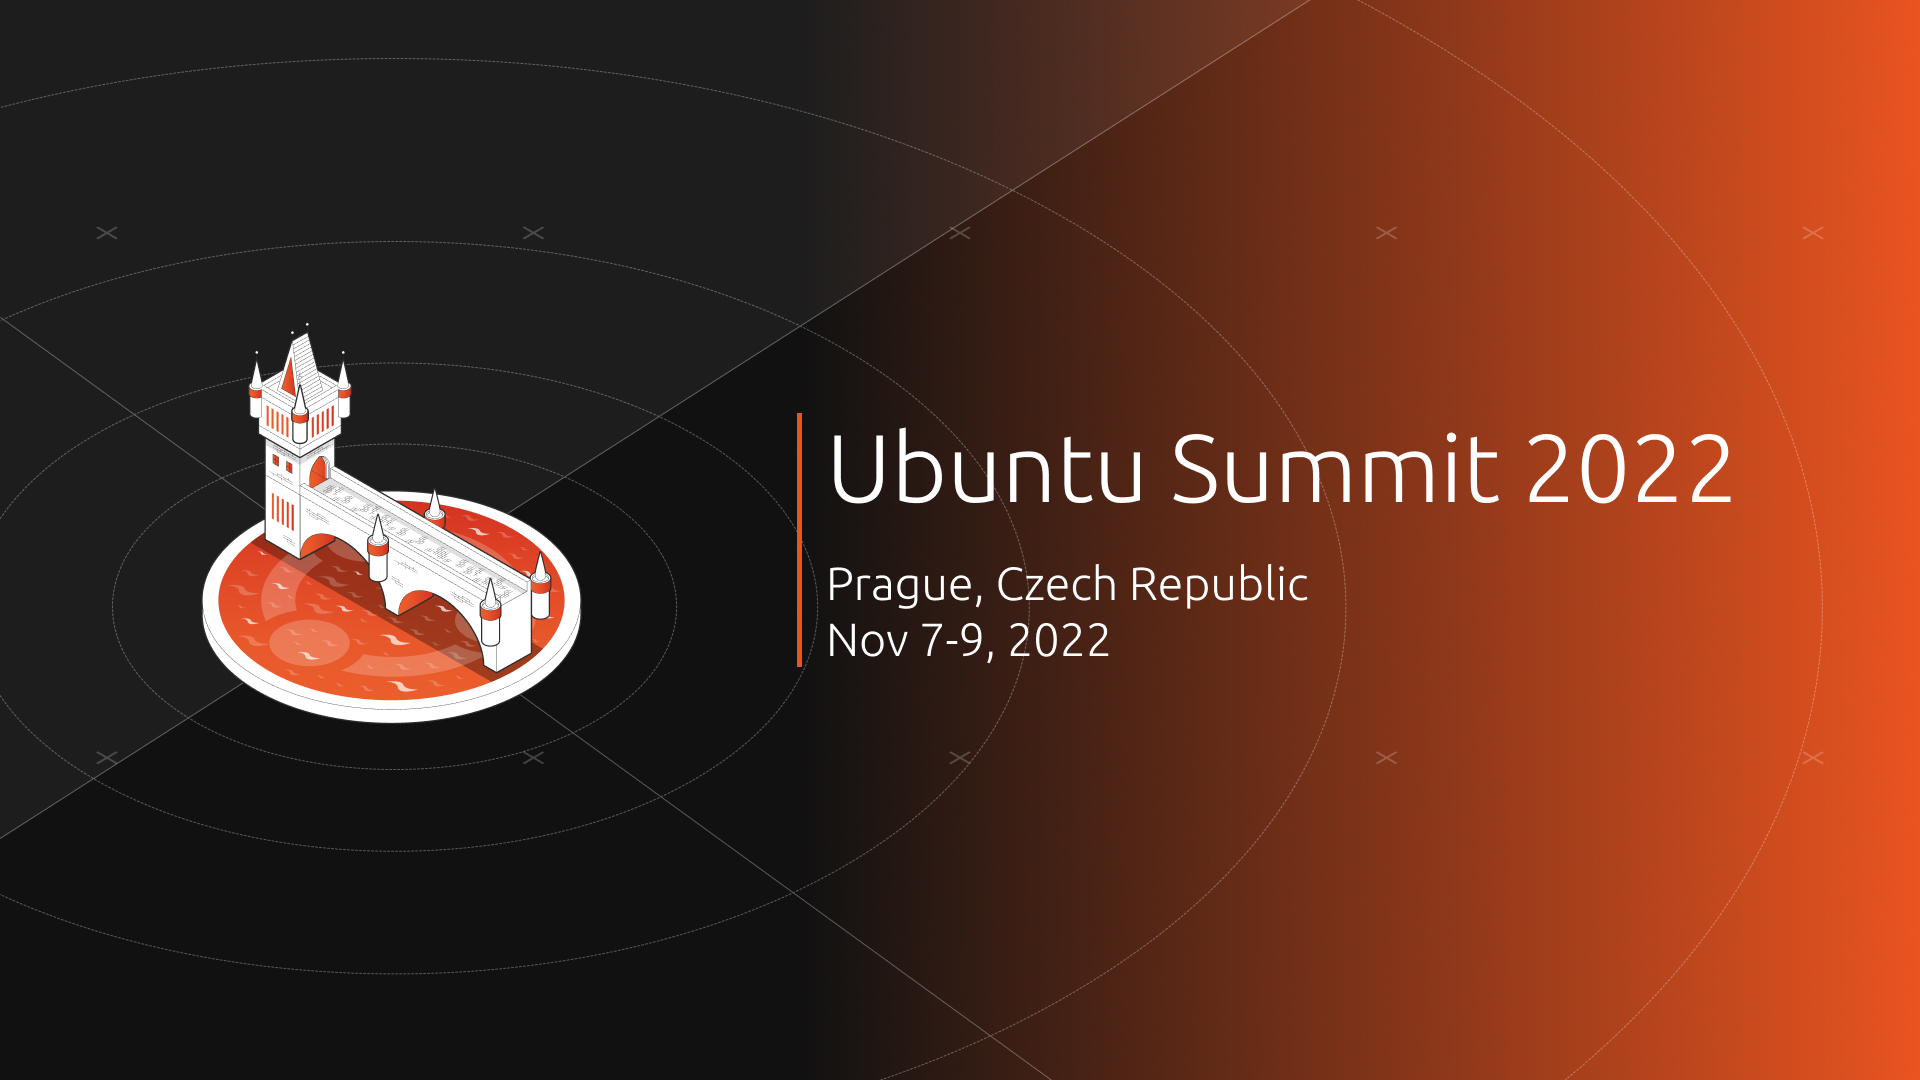 picture of a banner or logo from Ubuntu Summit